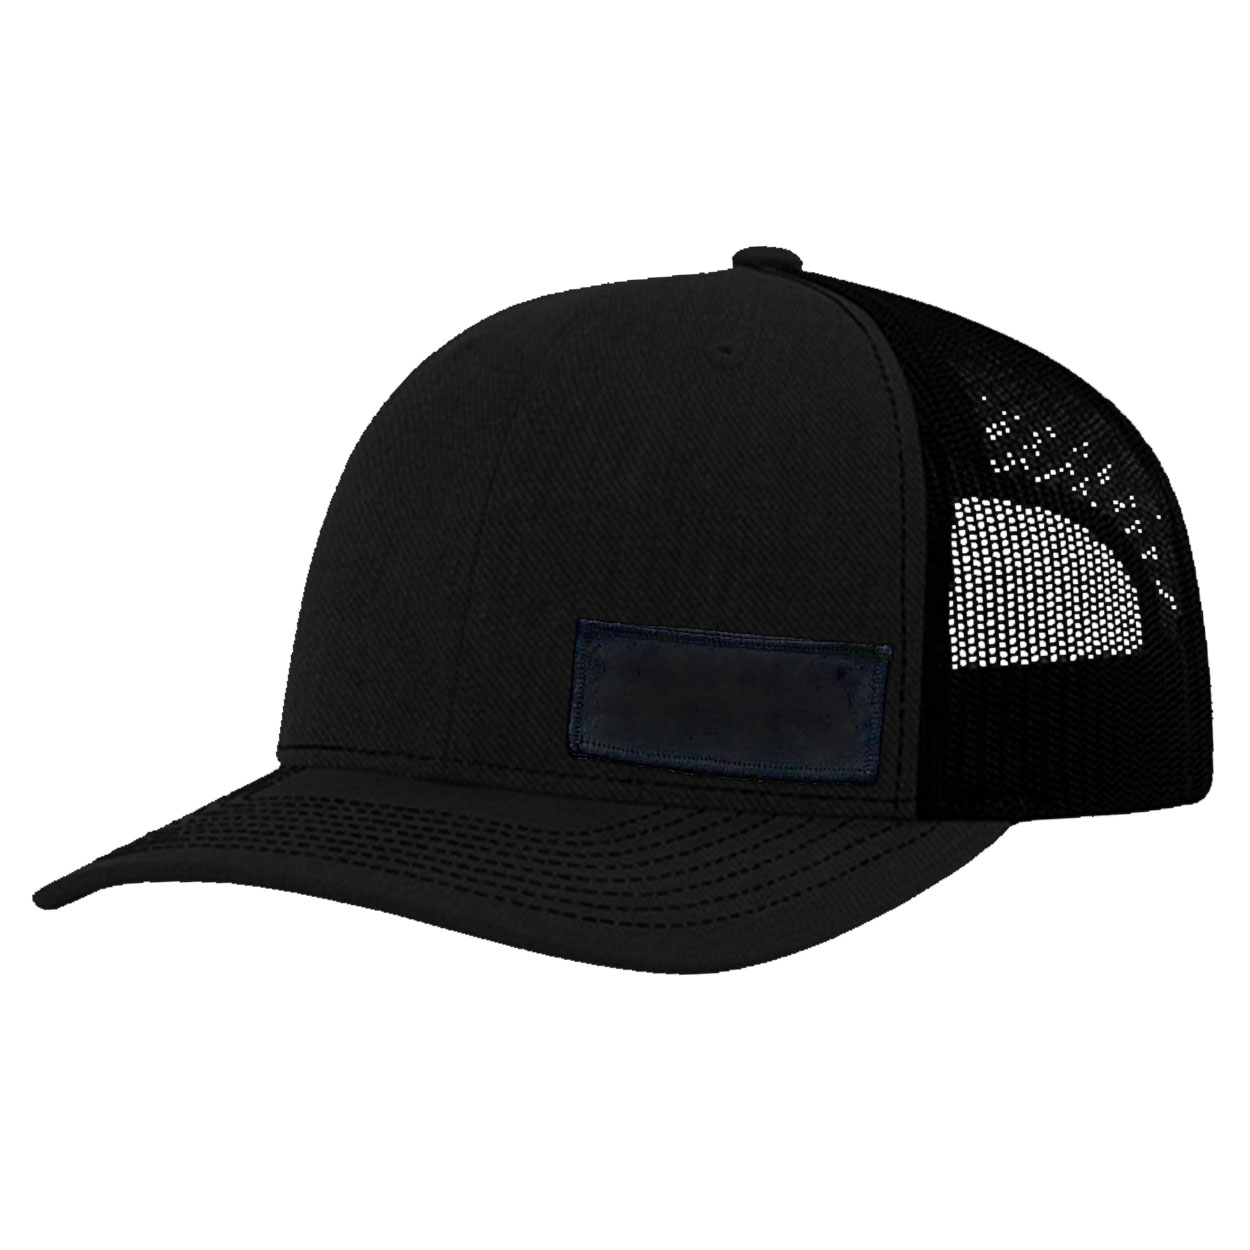 Product Details: Night Out Youth Patch Mesh Snapback Hat Black